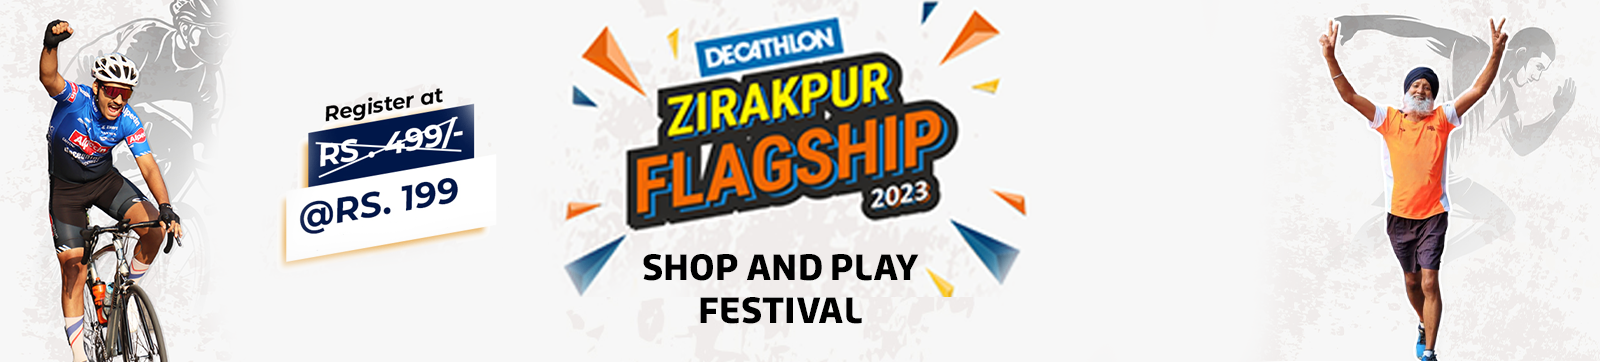 Decathlon Shop And Play Festival: Your Ultimate Fitness & Fun Extravaganza!